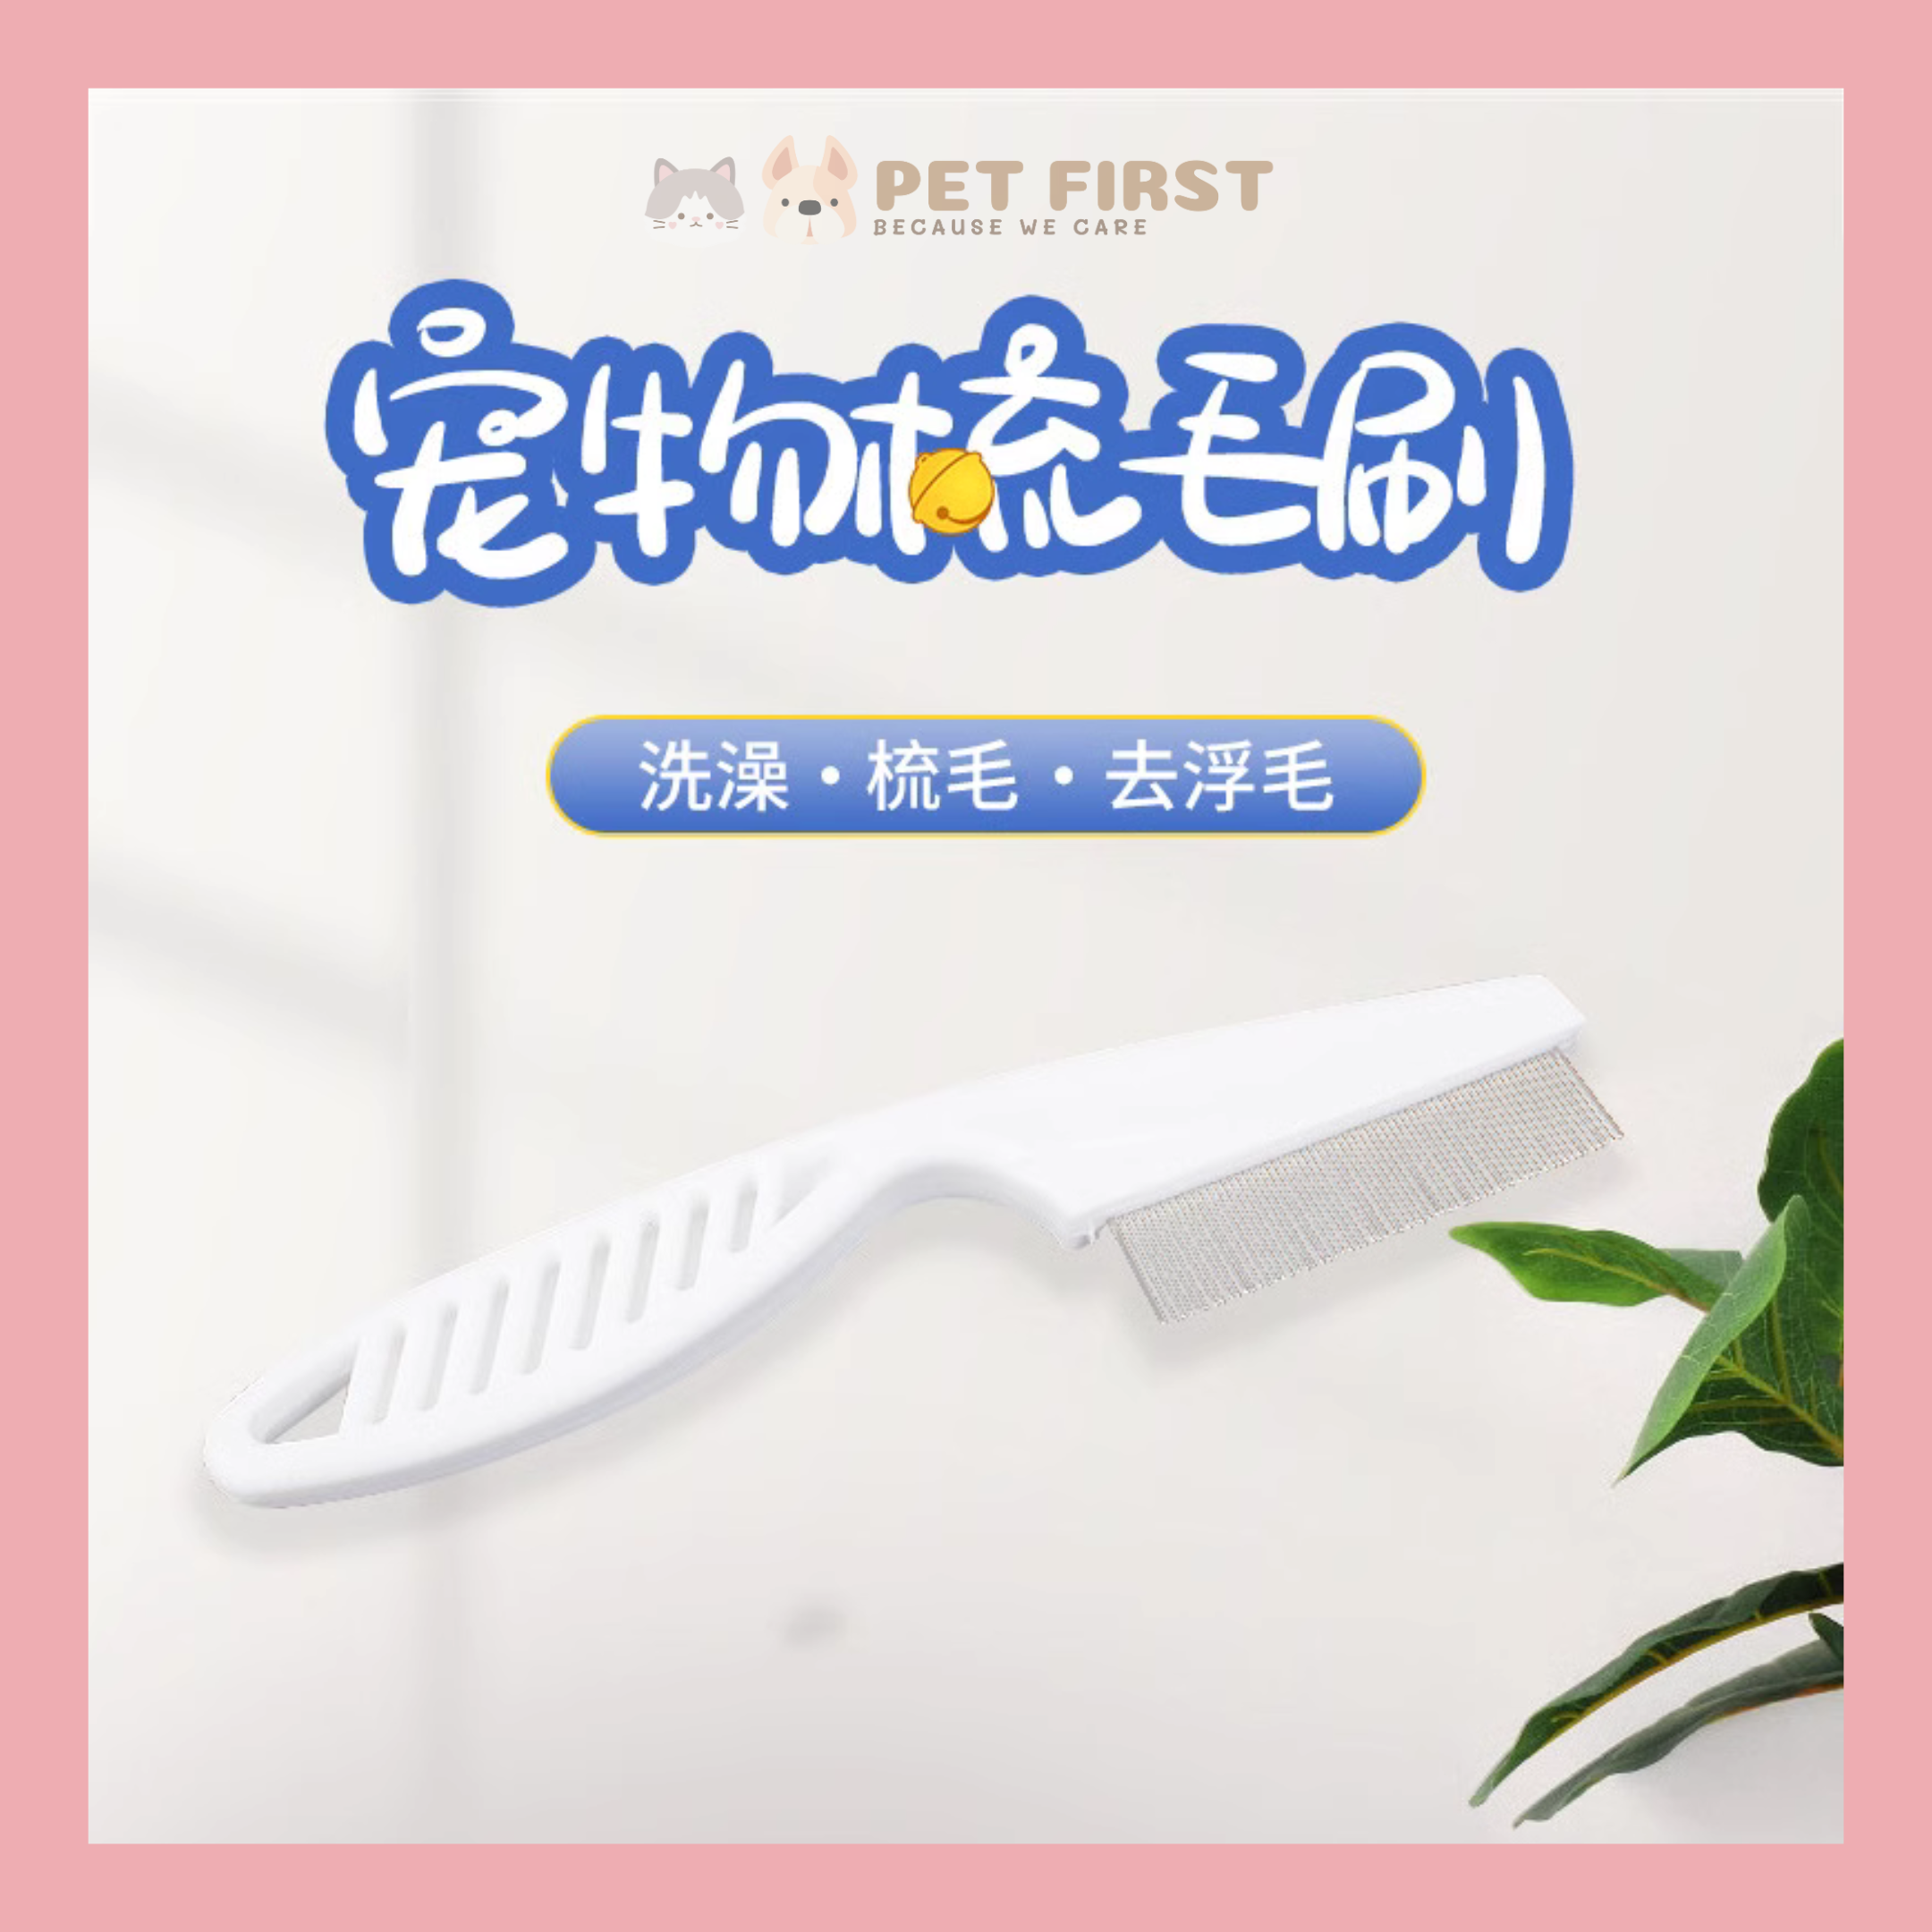 PET FIRST @ Product photo